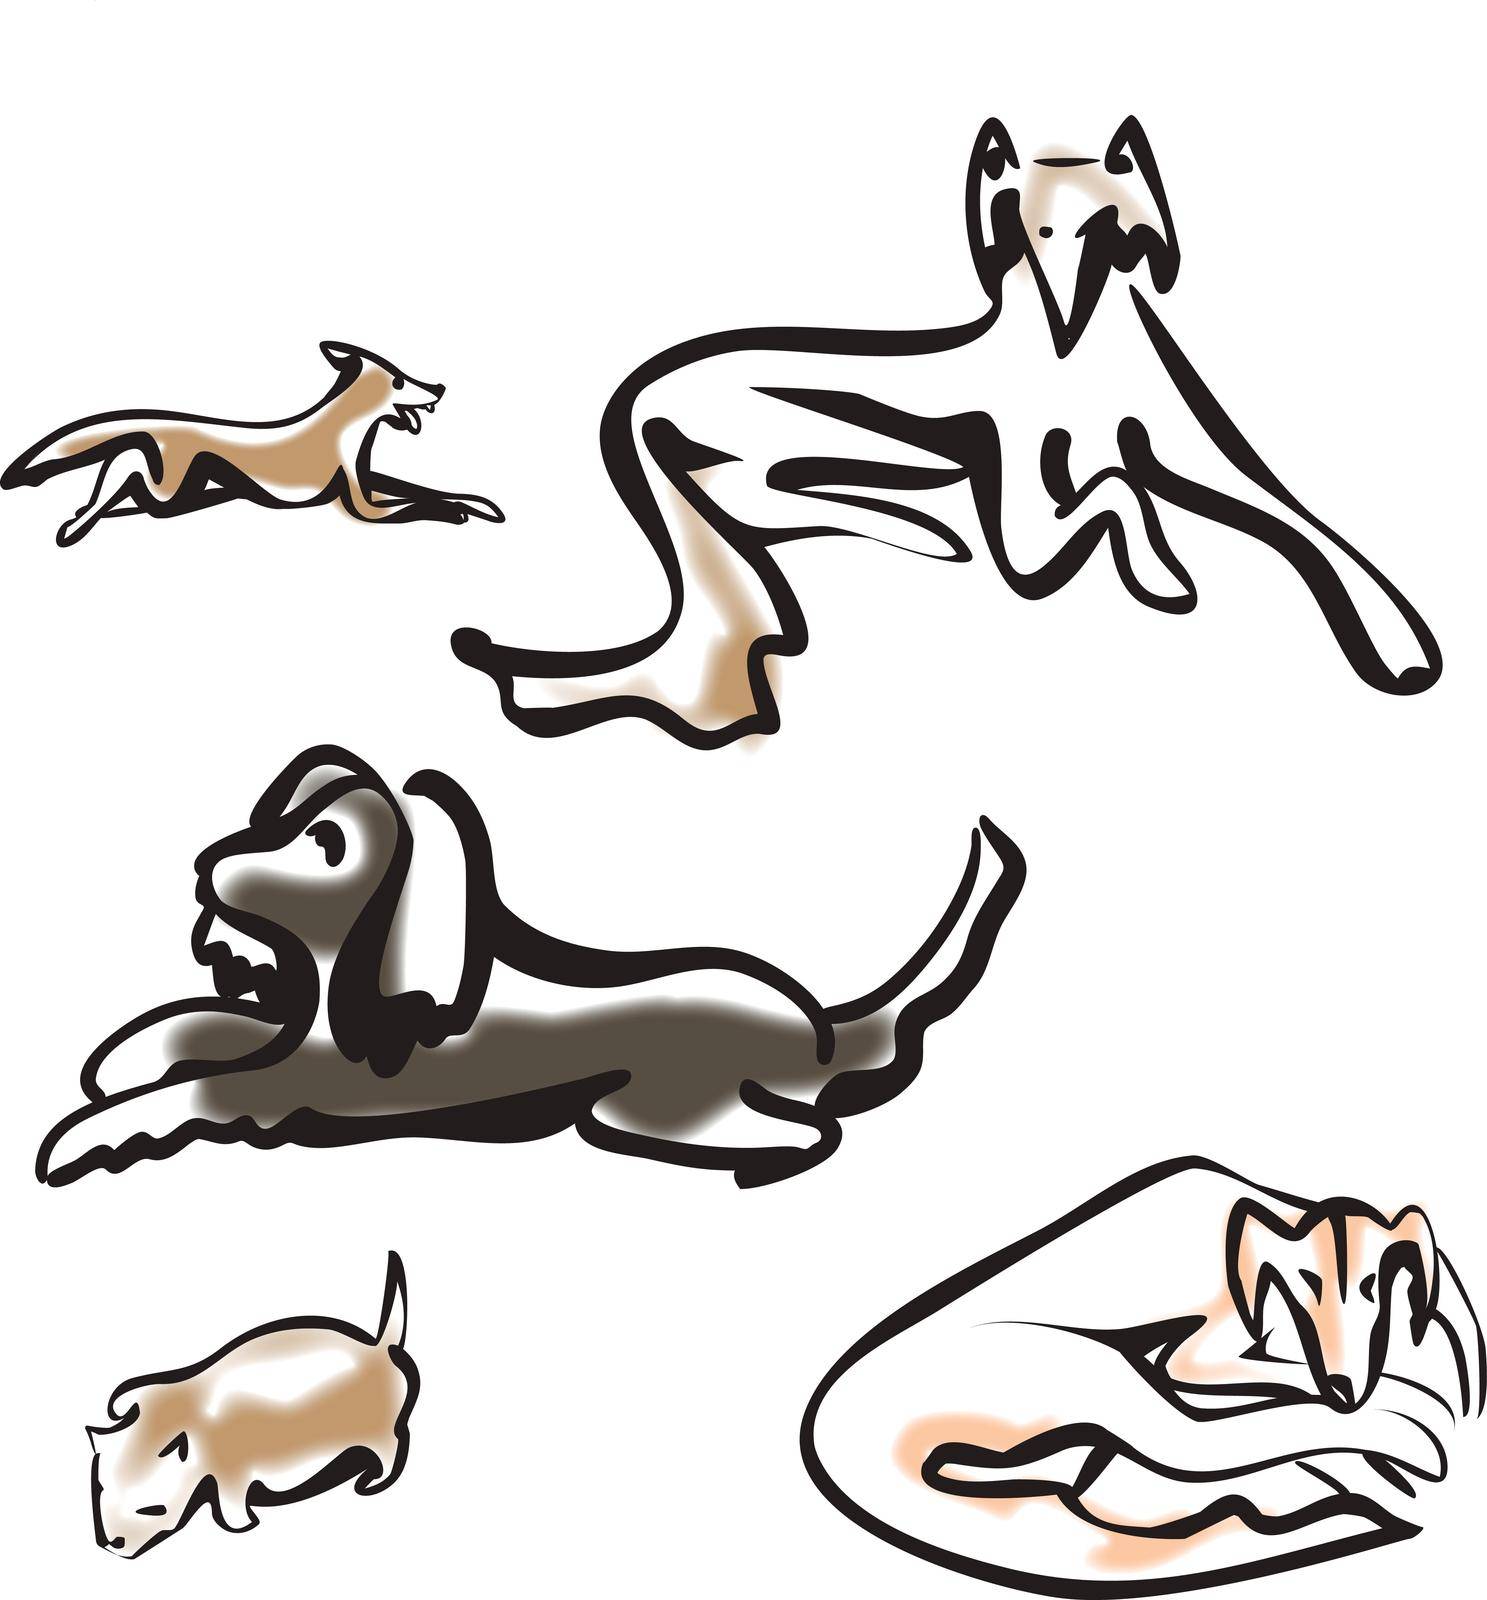 Cute yawning sleepy dog set. Collection of purebread dog of various breed sitting or lying. Funny domestic pet want to sleep. Group of animal. Isolated vector illustration in ink style